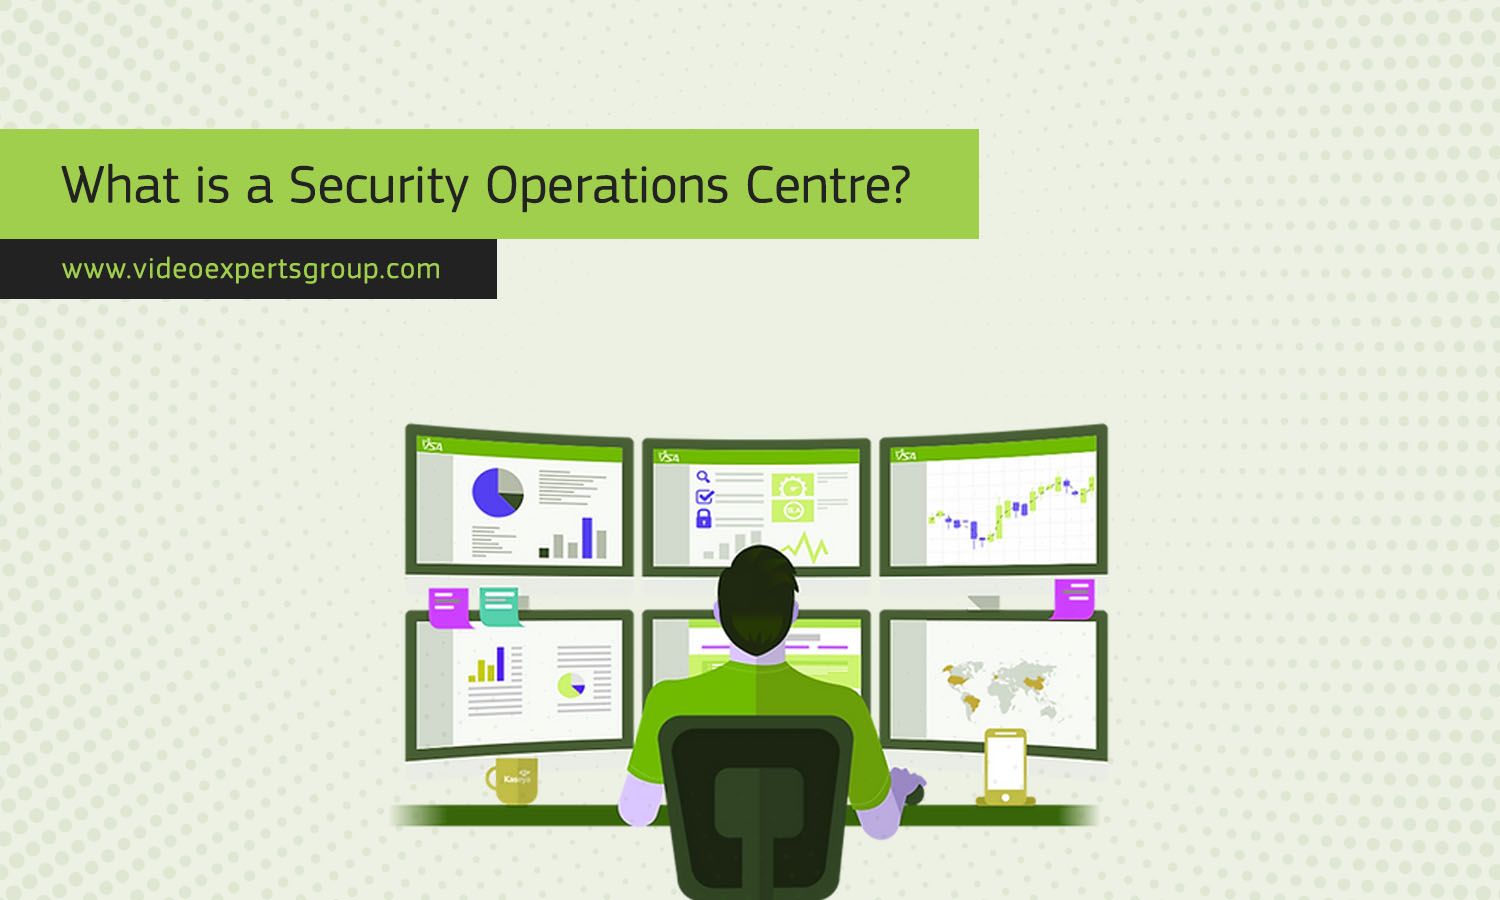 What is a Security Operations Centre (SOC)?